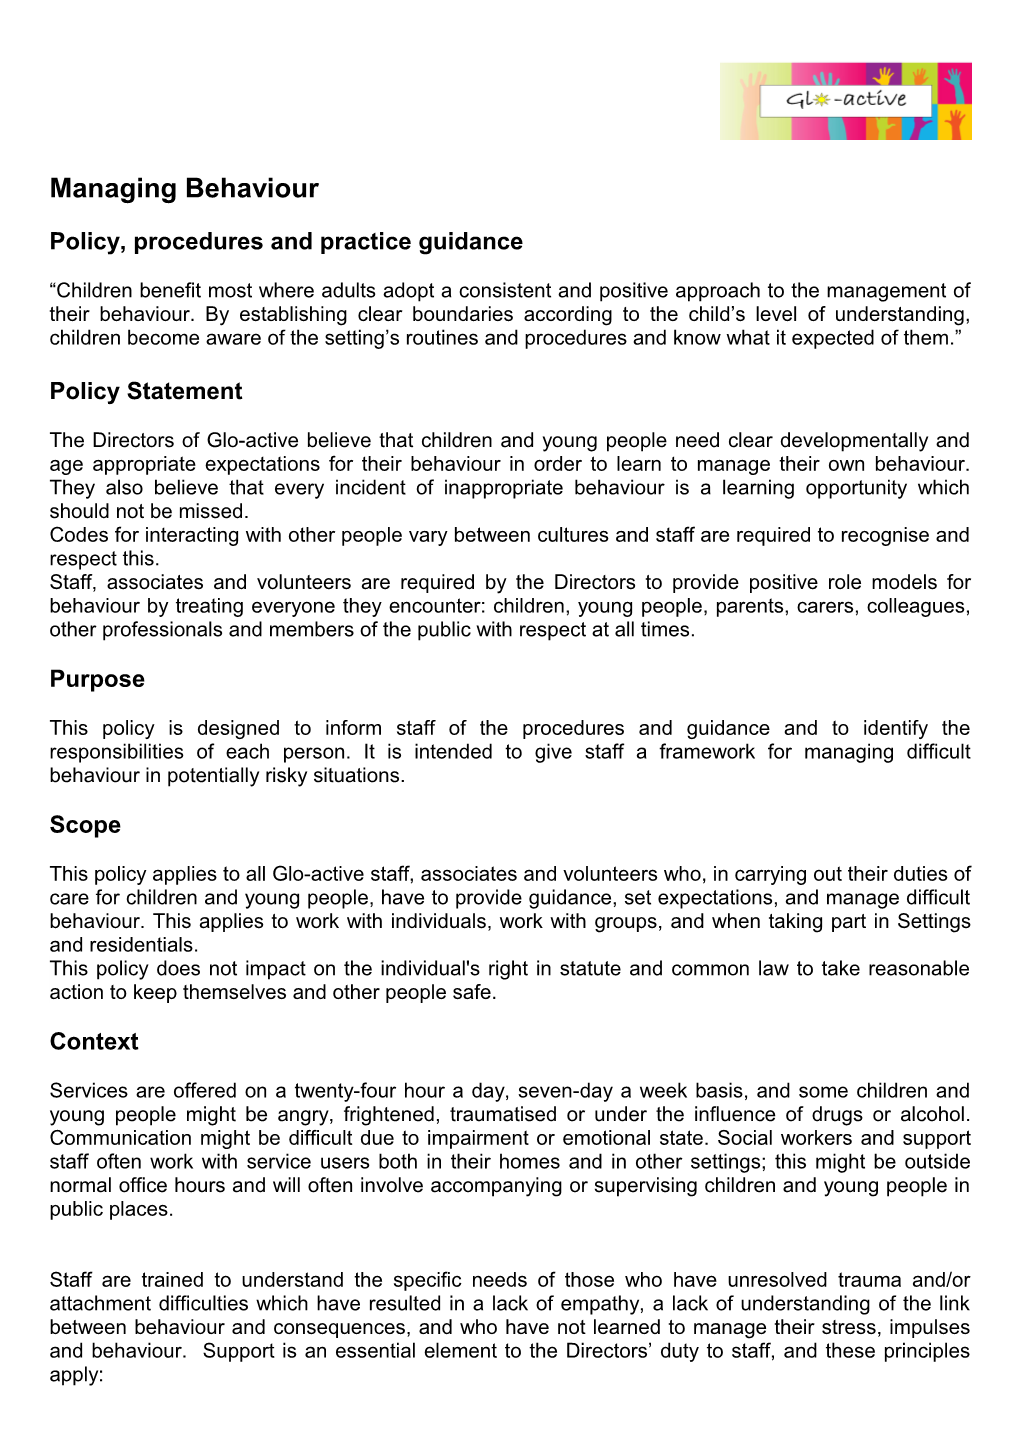 Policy, Procedures and Practice Guidance